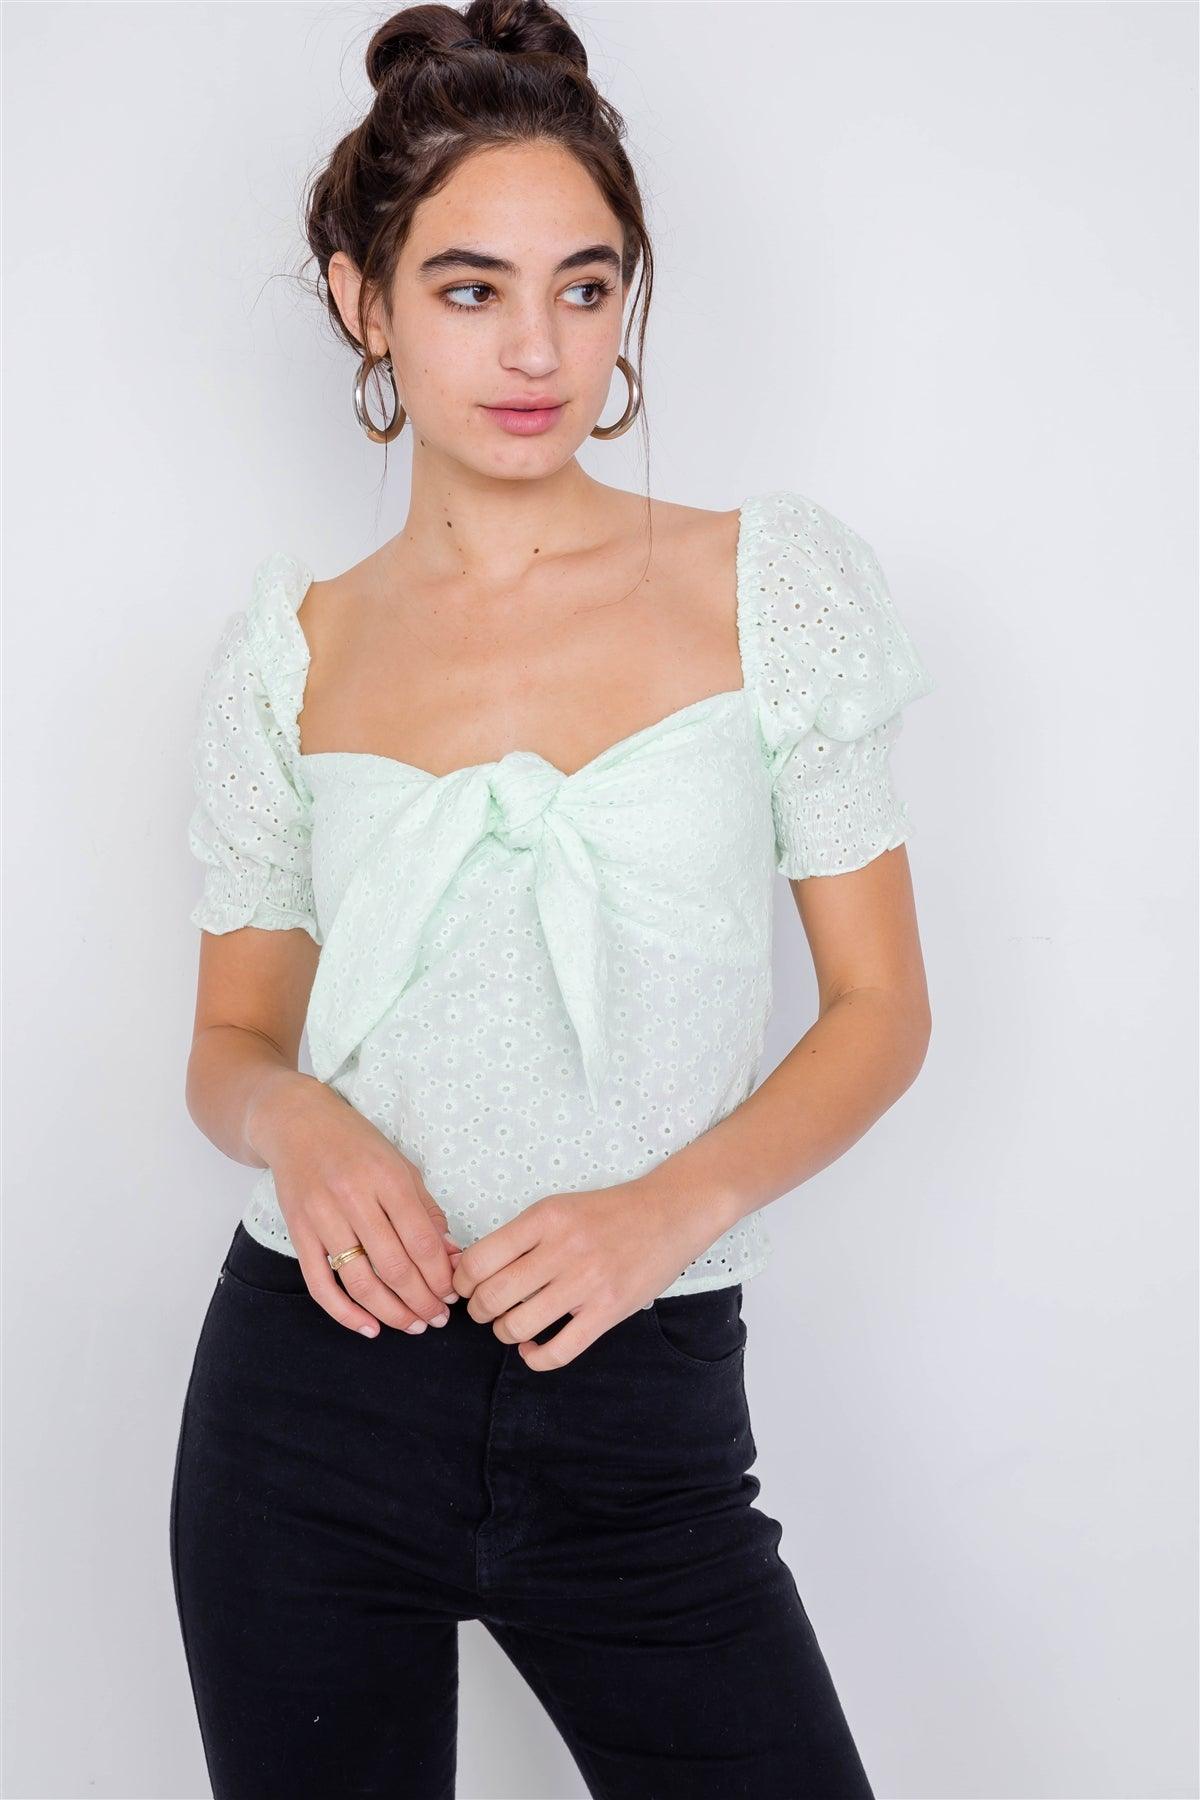 Melon Floral Eyelet Office Chic Square Neck Front Bow Top   /3-2-1